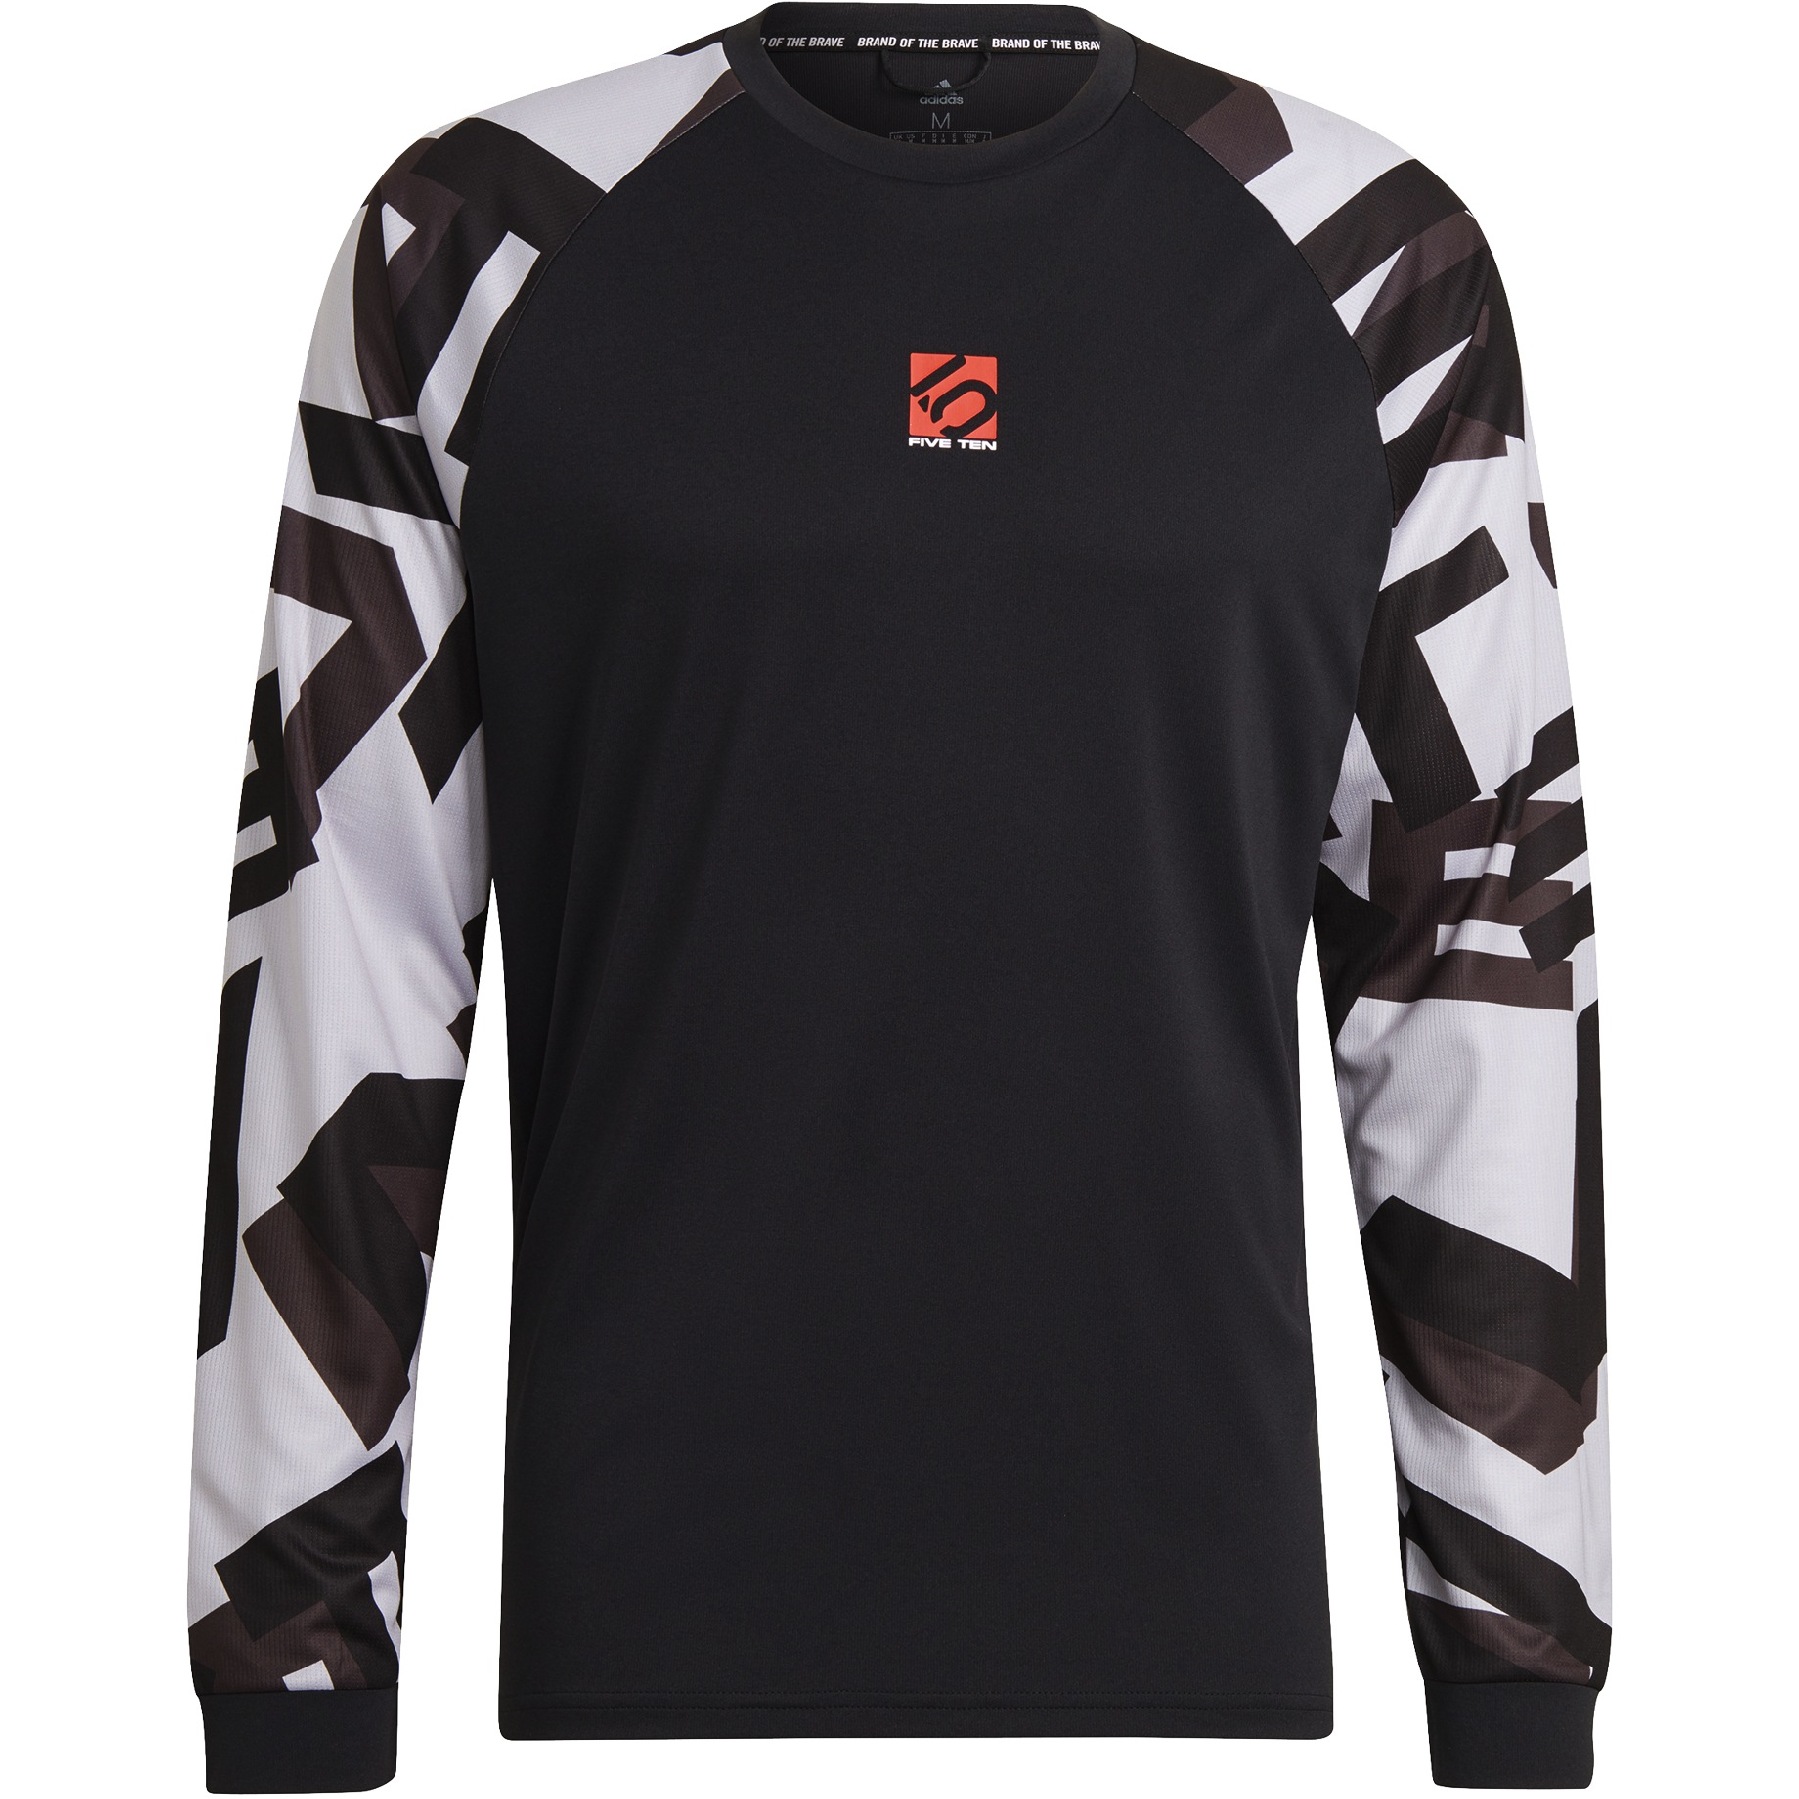 Picture of Five Ten TrailX Long-Sleeve Top - Black / Light Granite